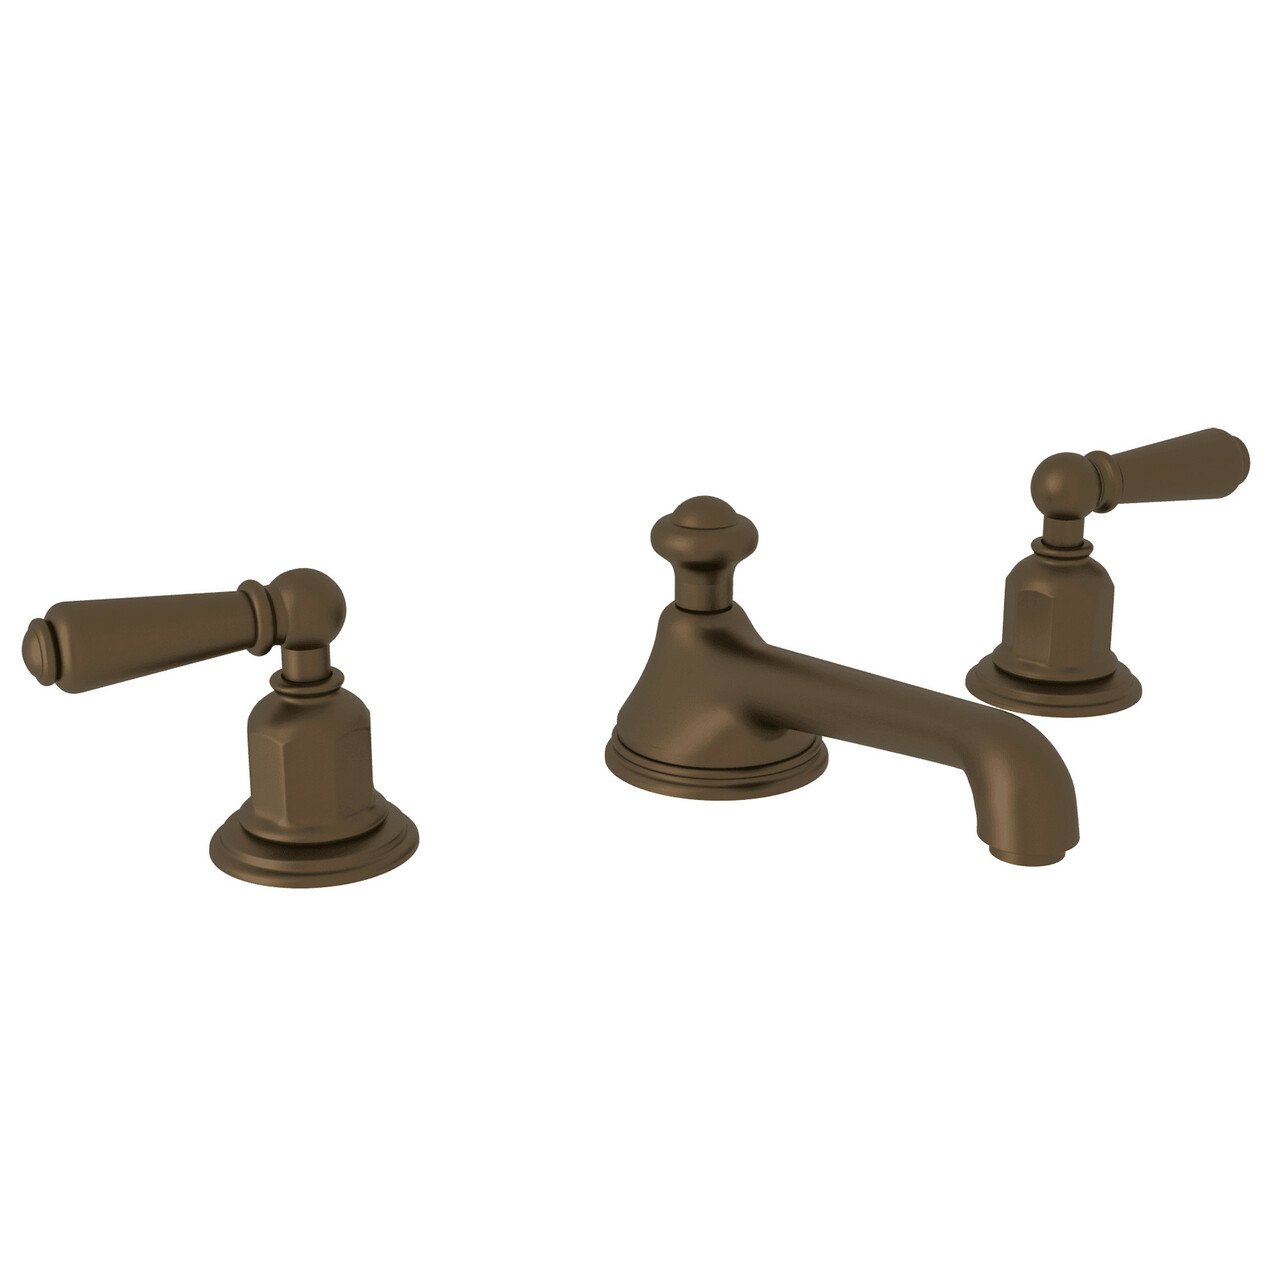 Perrin & Rowe Edwardian Low Level Spout Widespread Bathroom Faucet - BNGBath